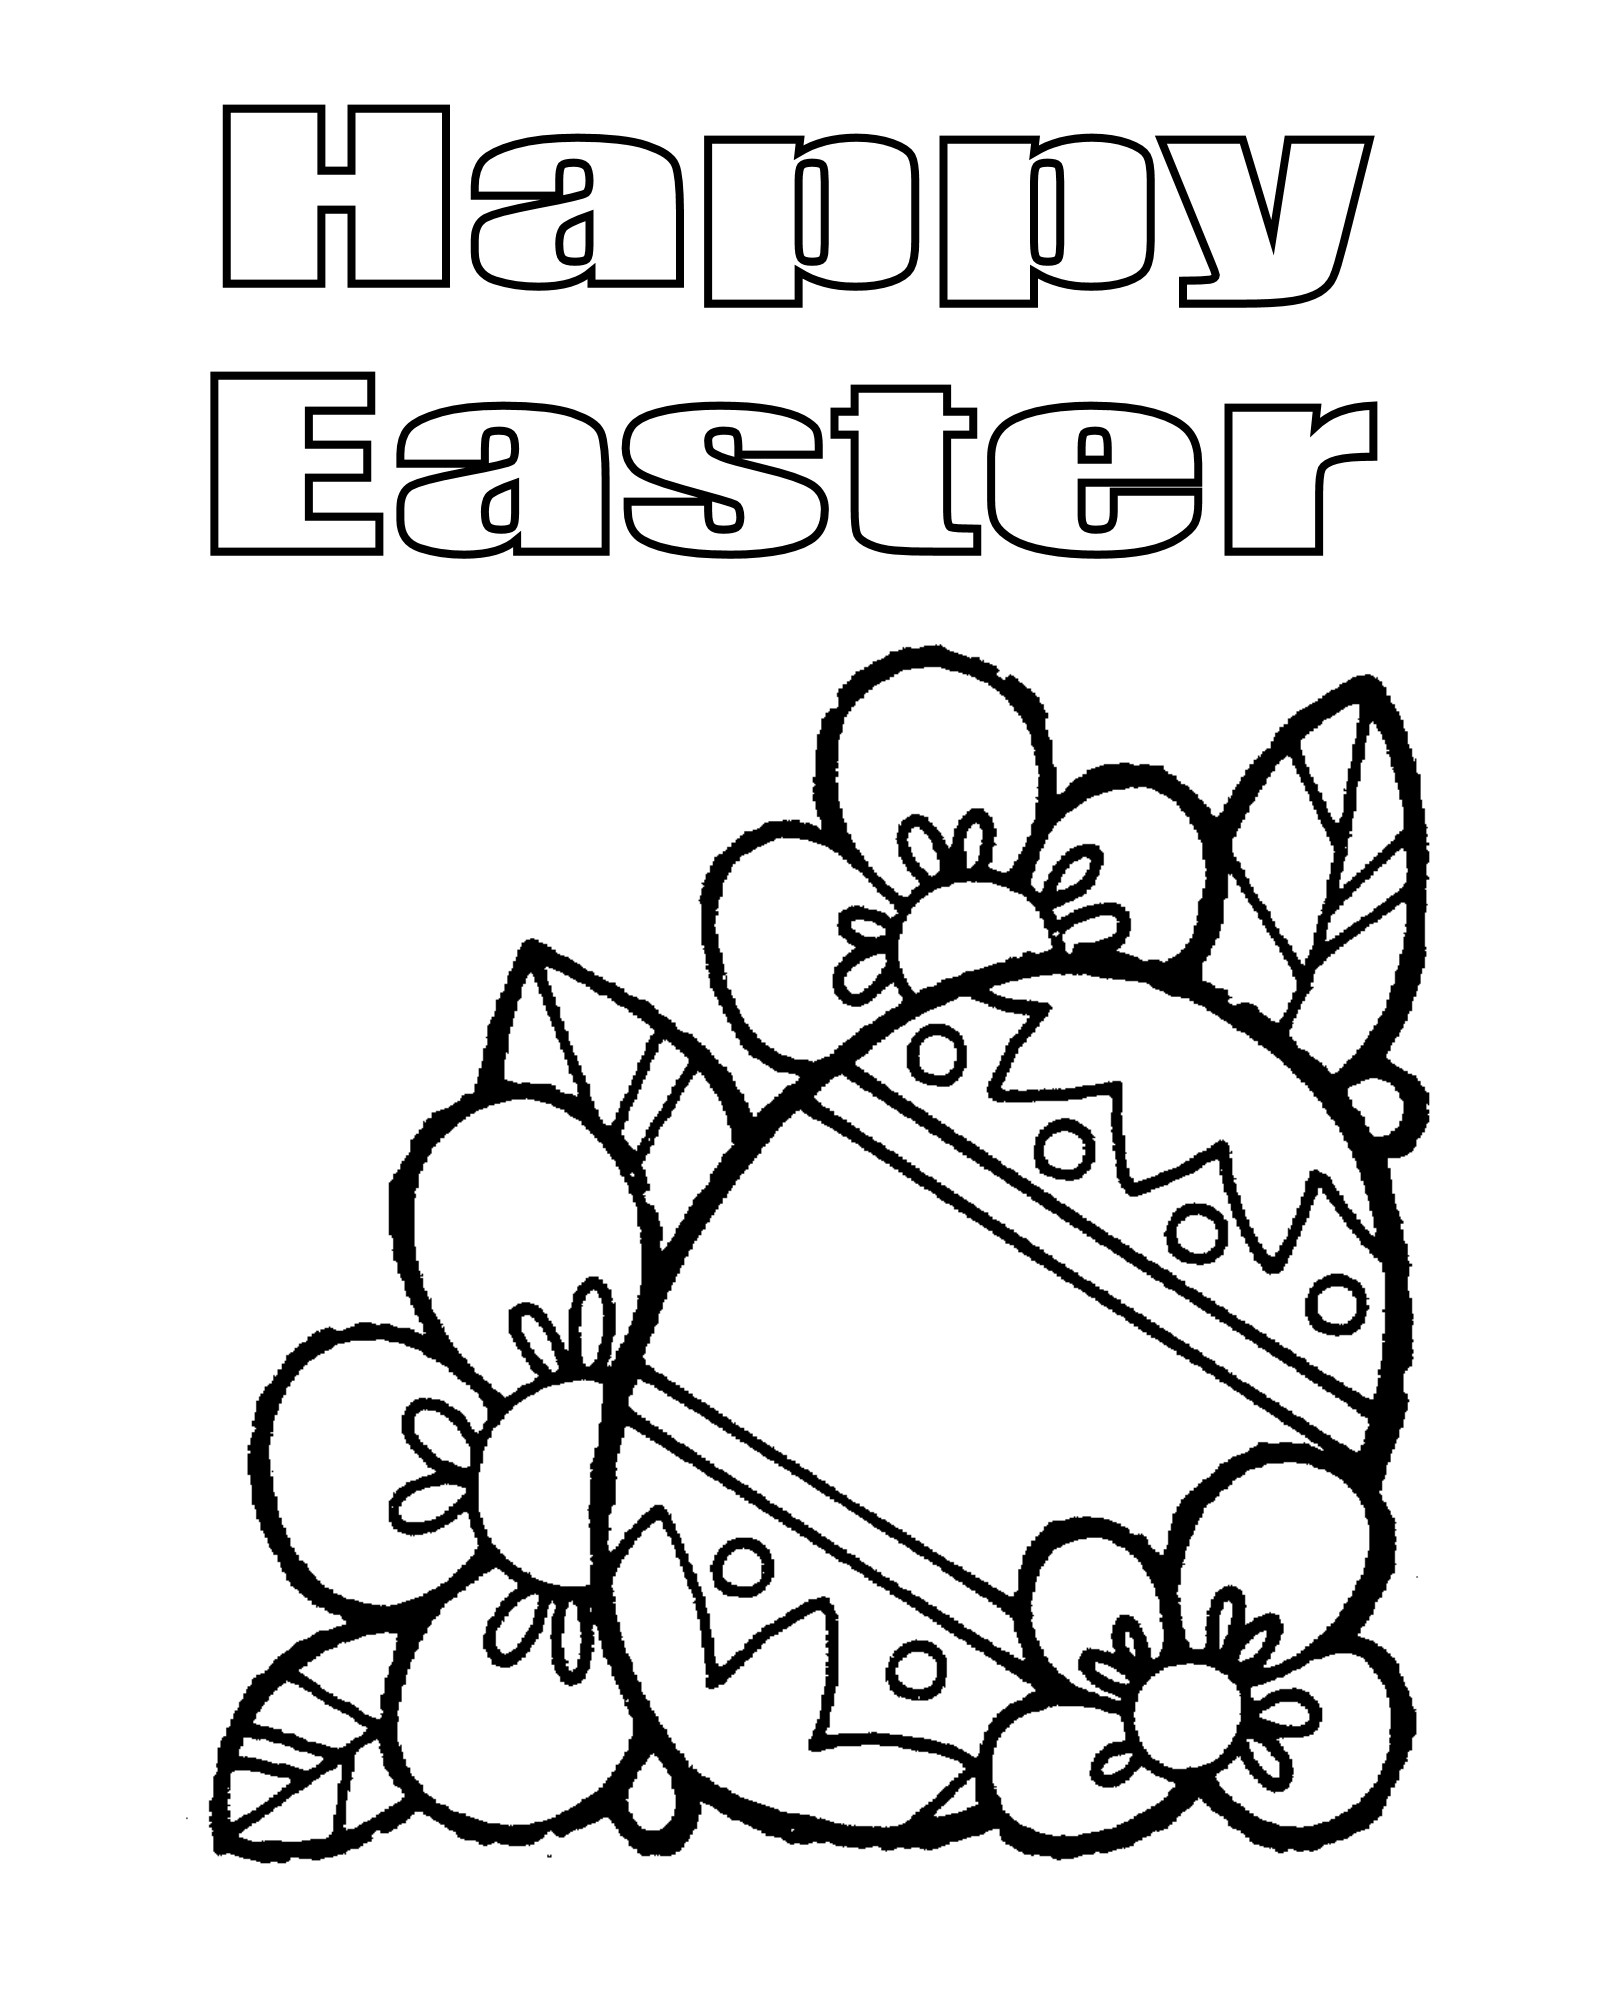 Happy Easter Coloring Pages Free Printable
 Happy Easter Coloring Pages Best Coloring Pages For Kids